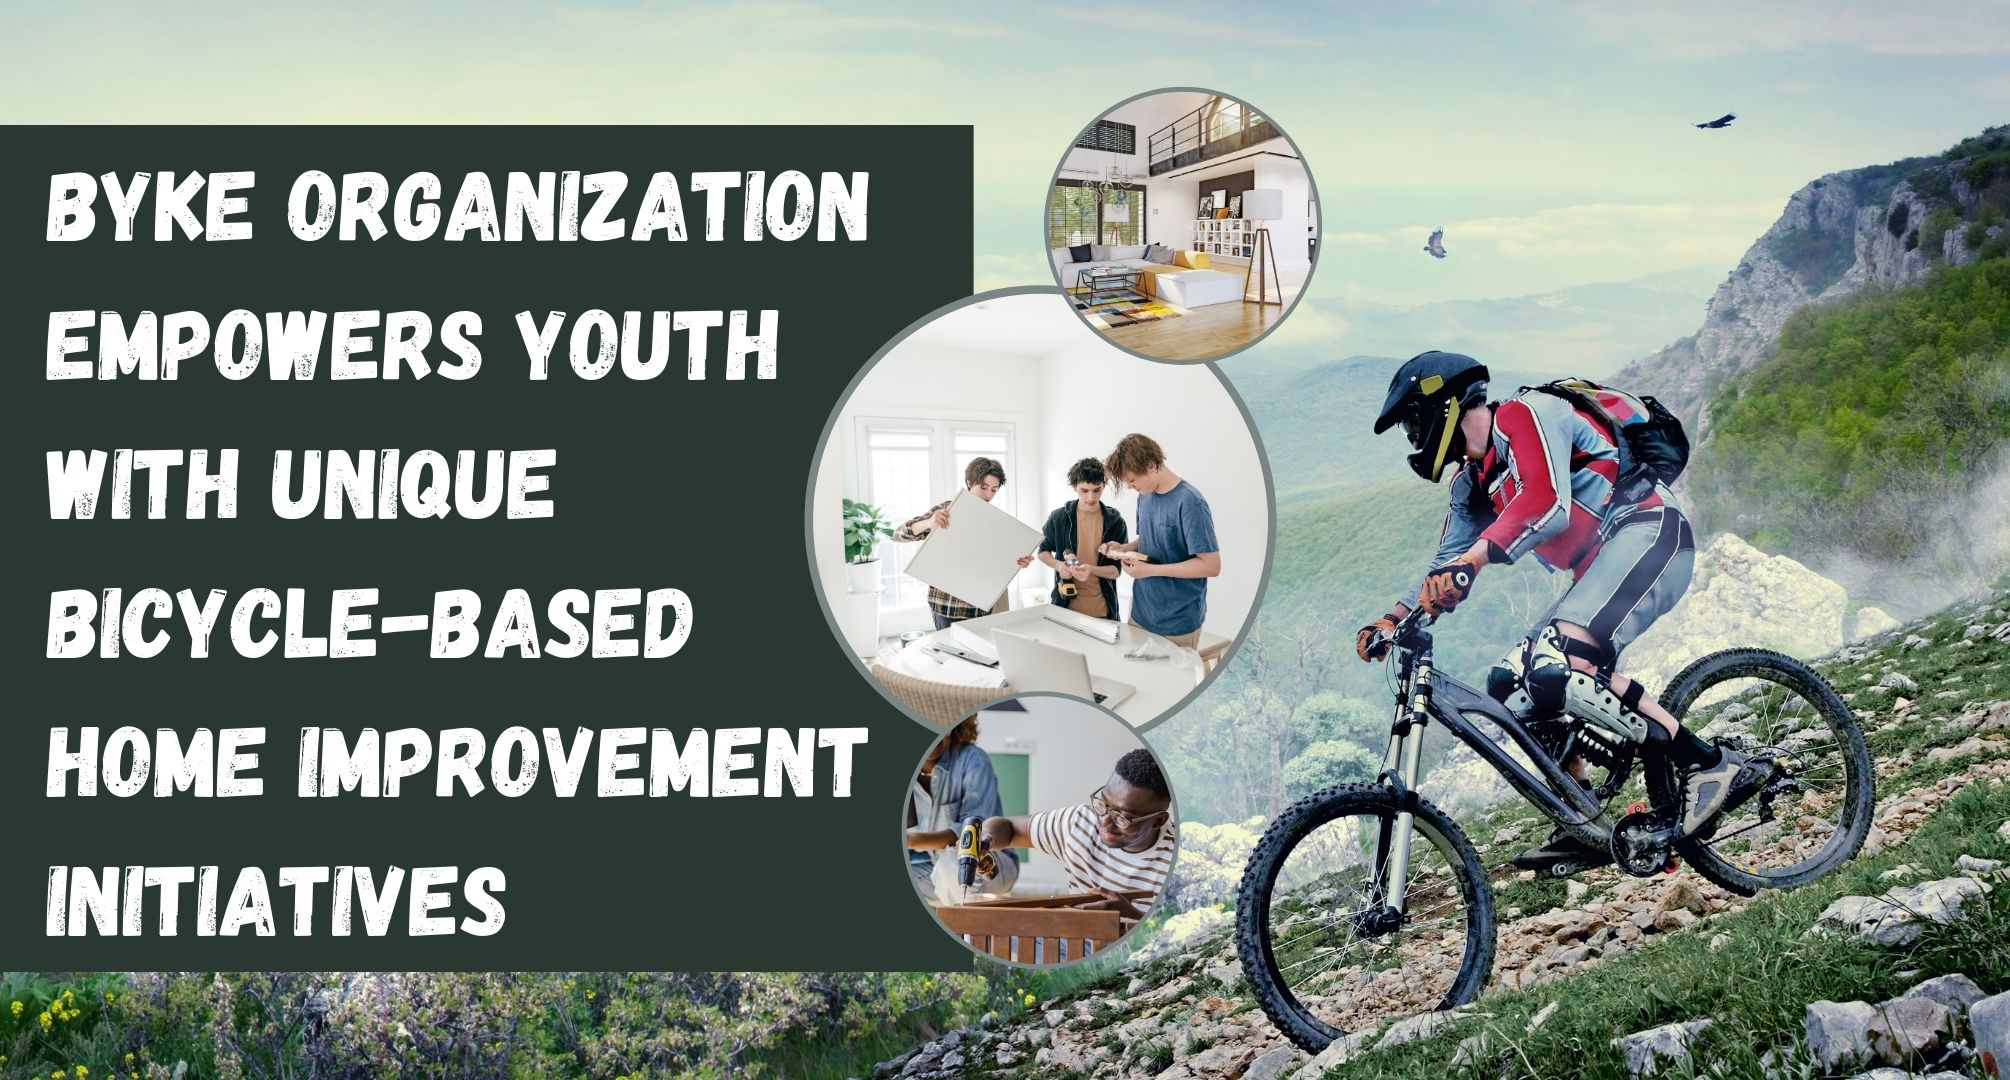 BYKE Organization Empowers Youth with Unique Bicycle-Based Home Improvement Initiatives